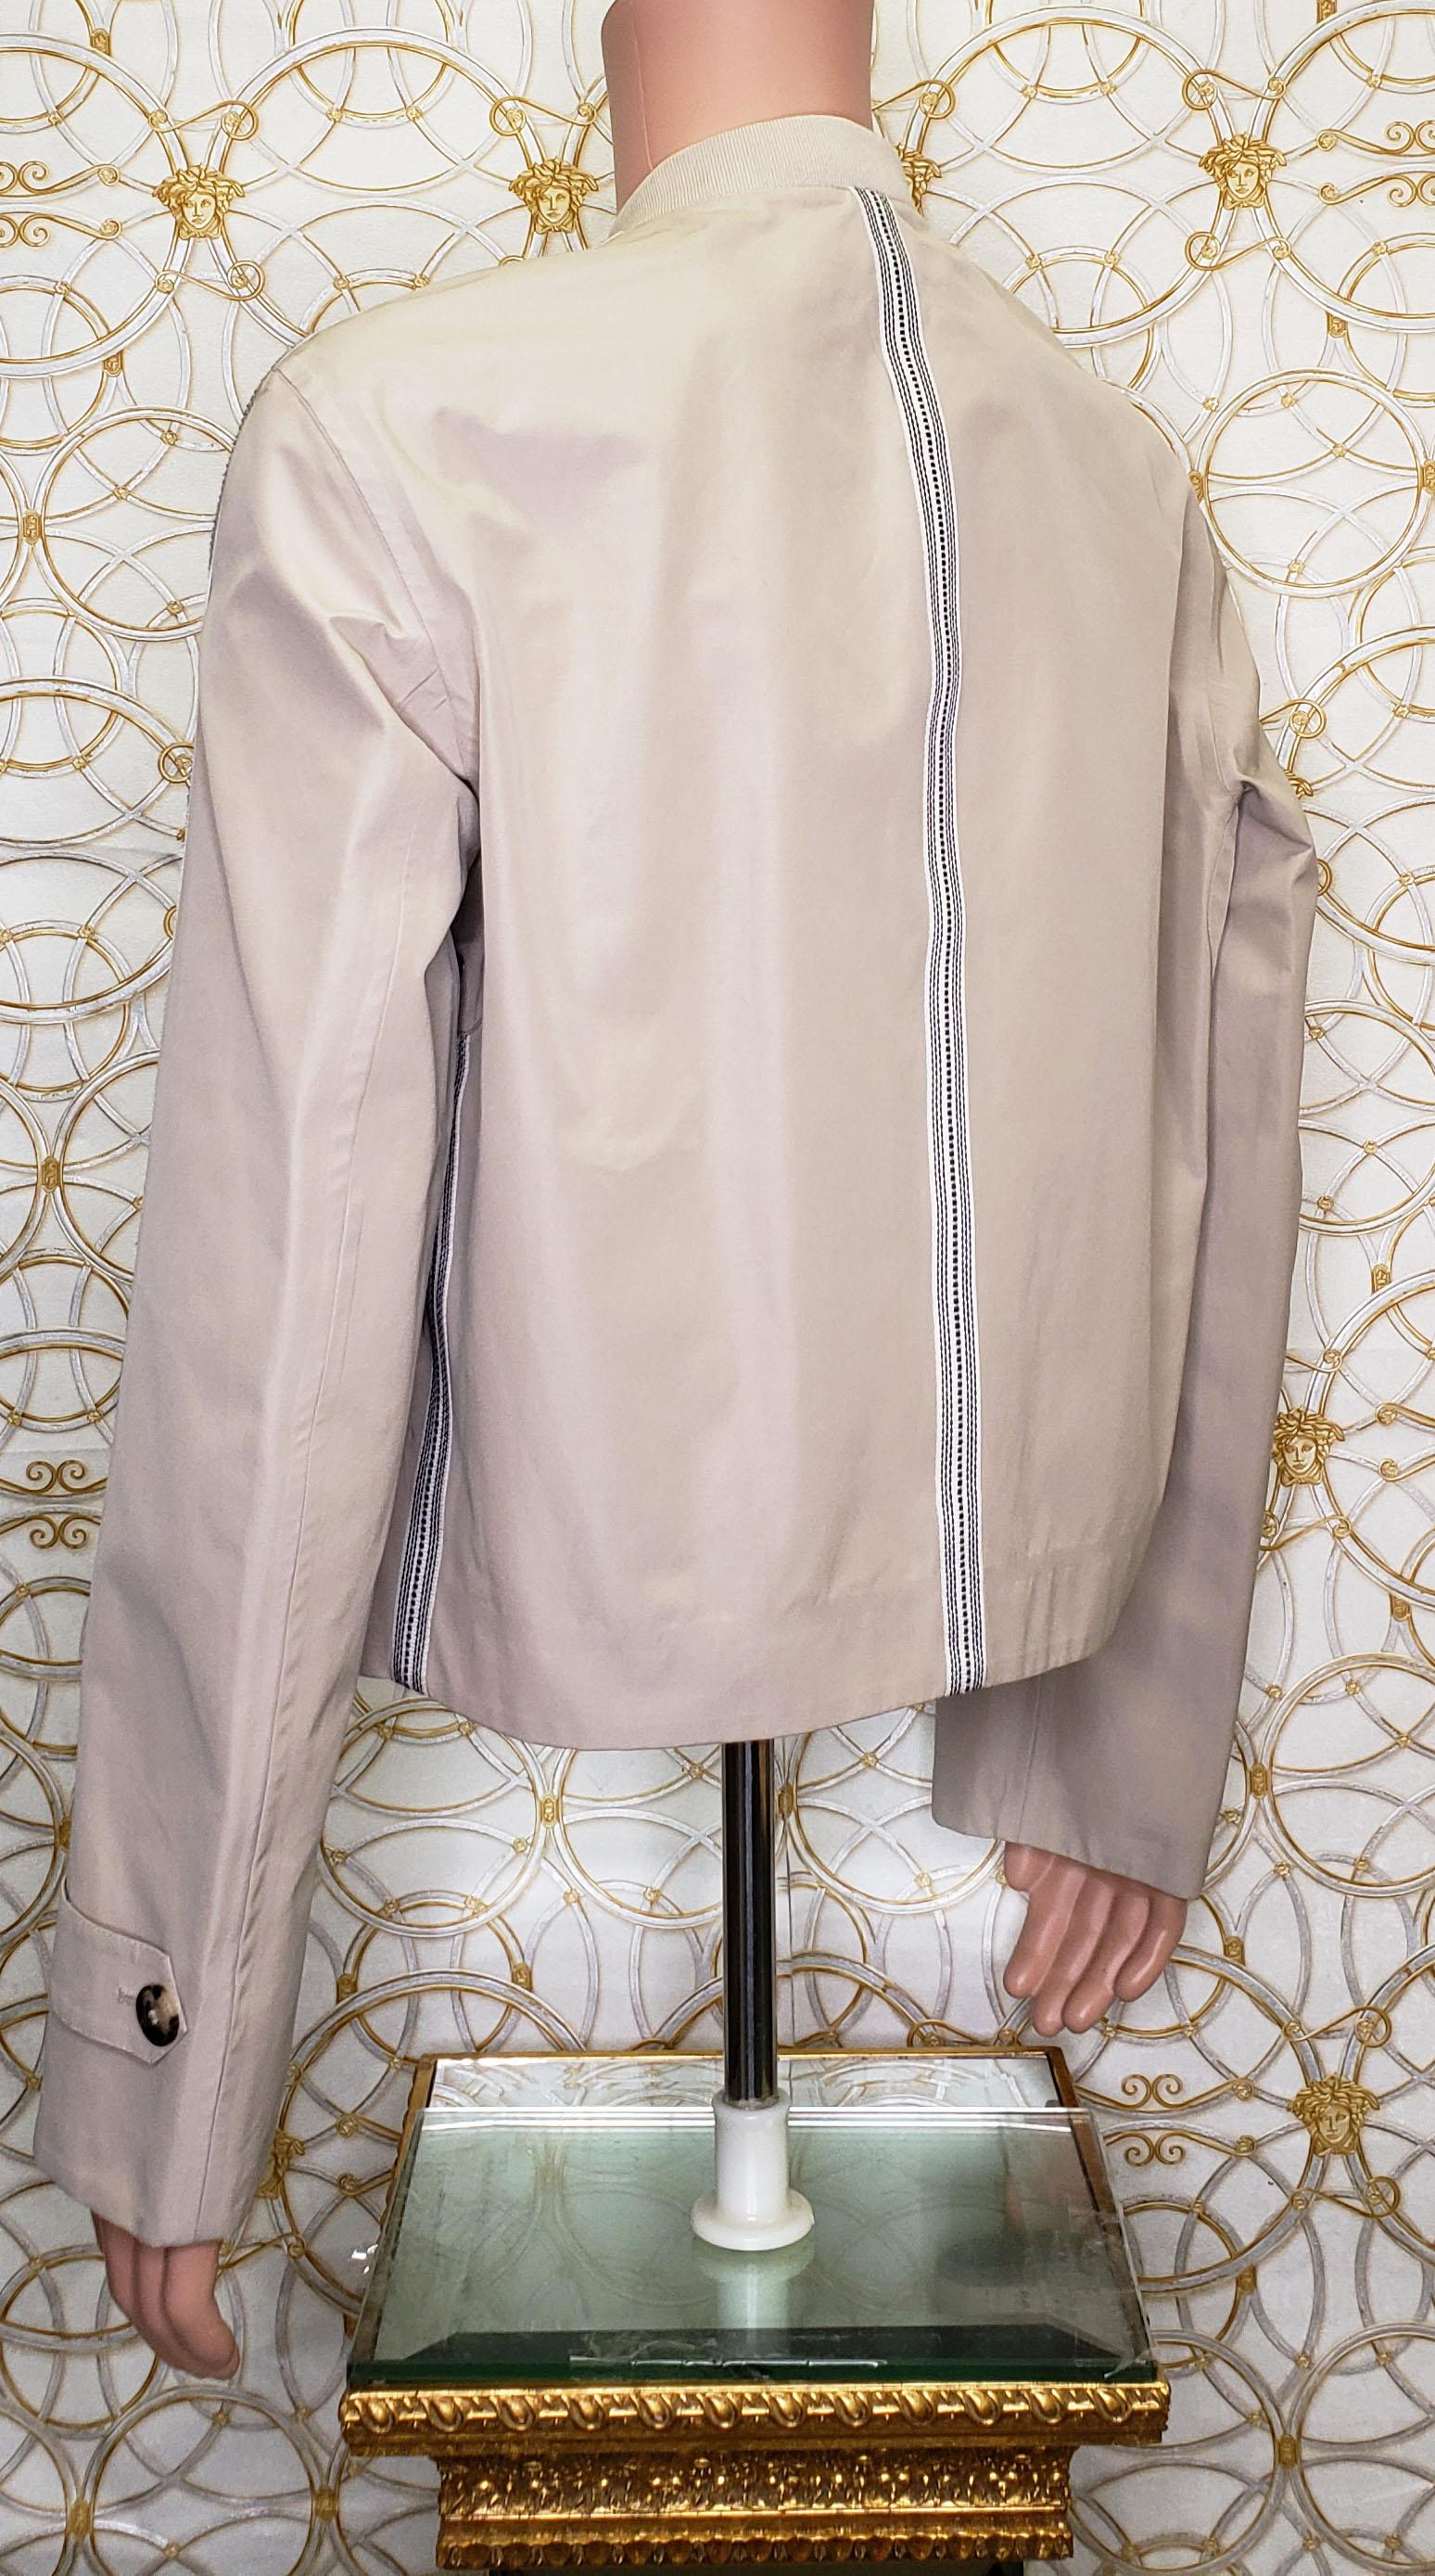 S/S 2016 L#17 NEW VERSACE BEIGE BOMBER JACKET with ZIPPER CLOSURE 50 - 40 For Sale 1